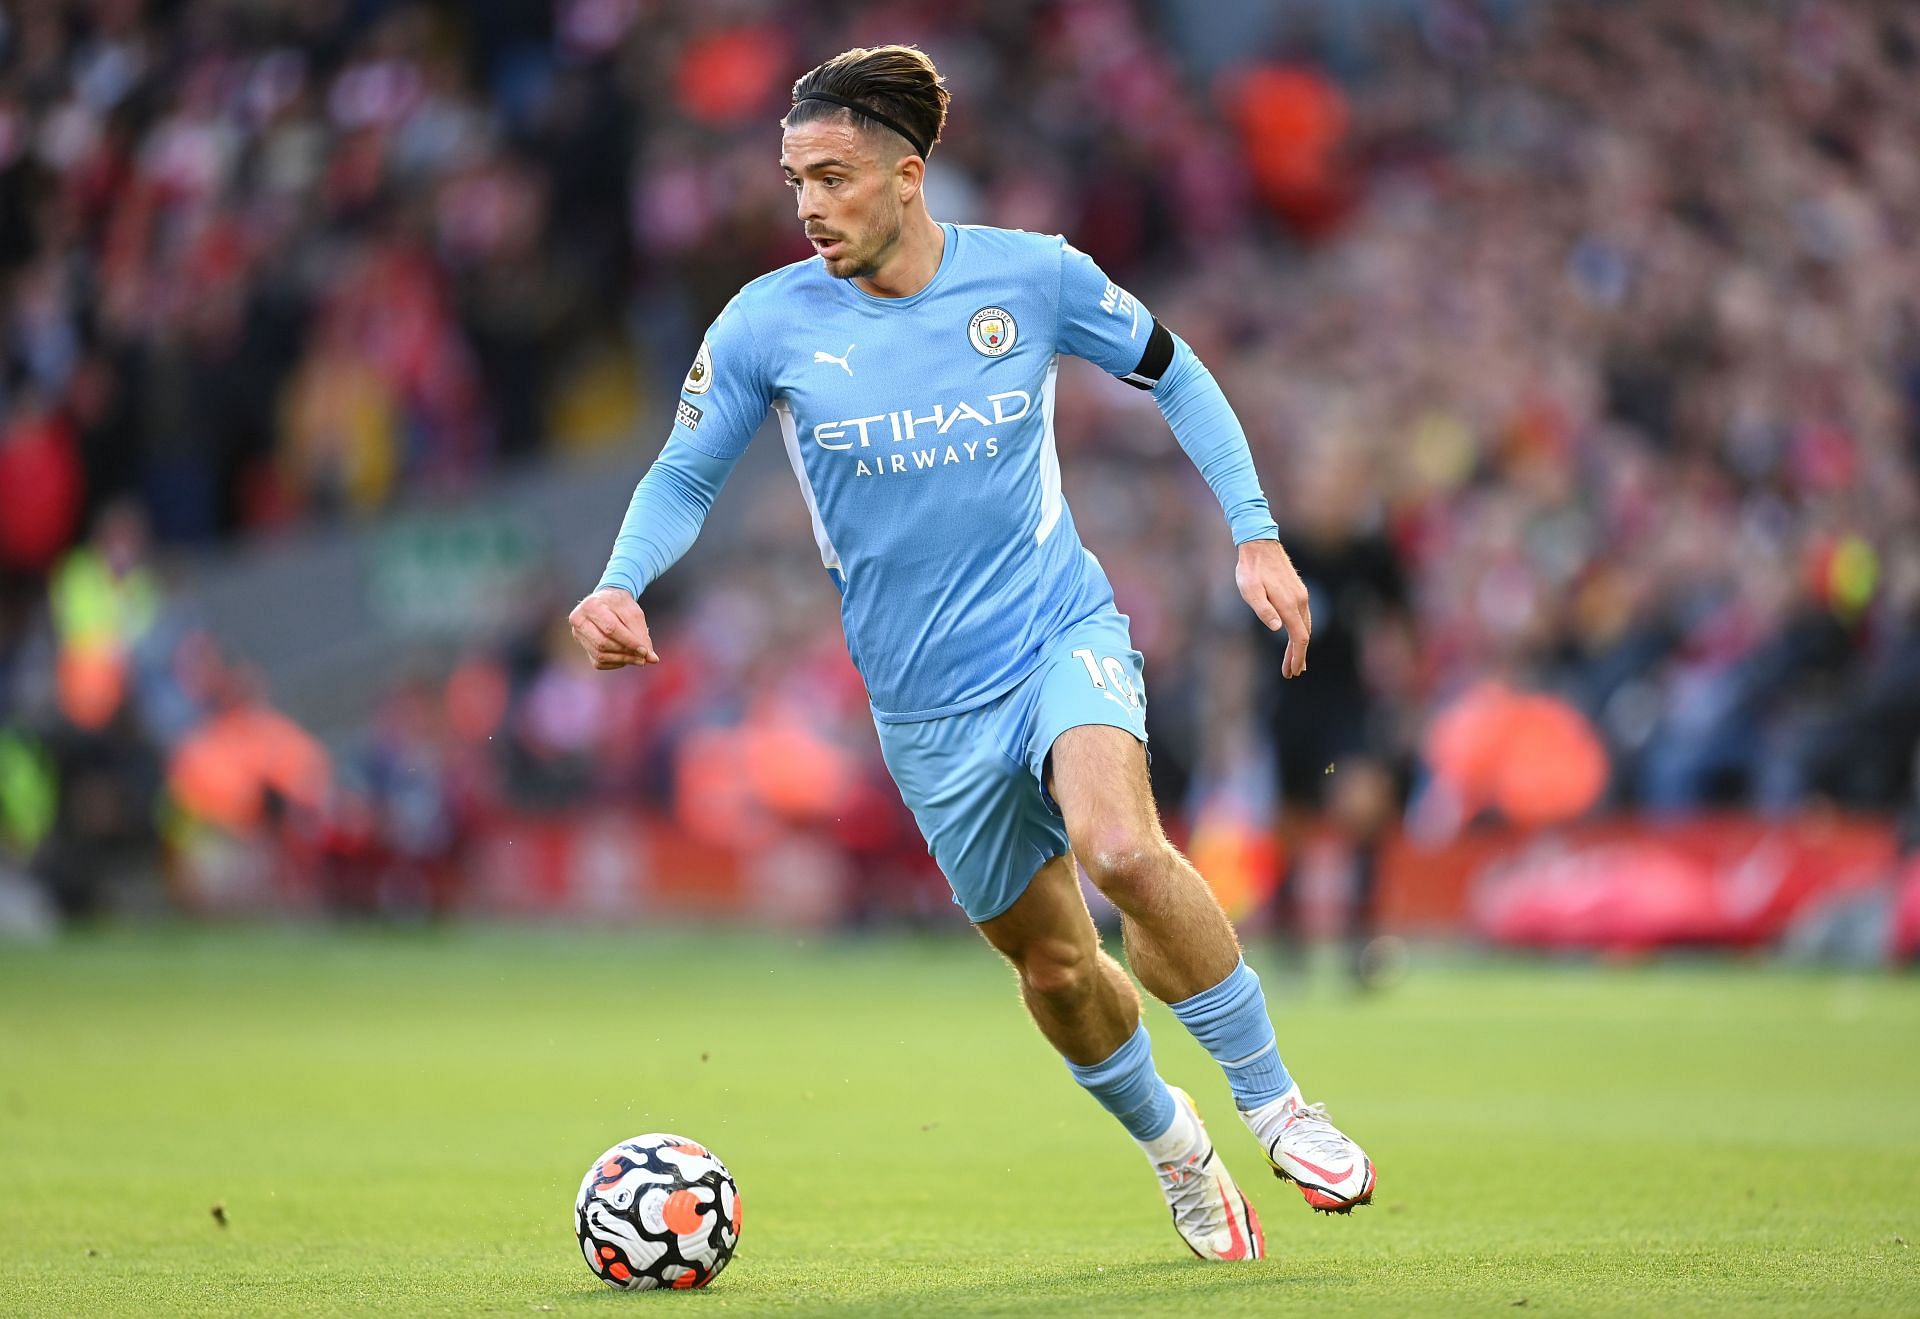 Jack Grealish arrived at Manchester City this summer.